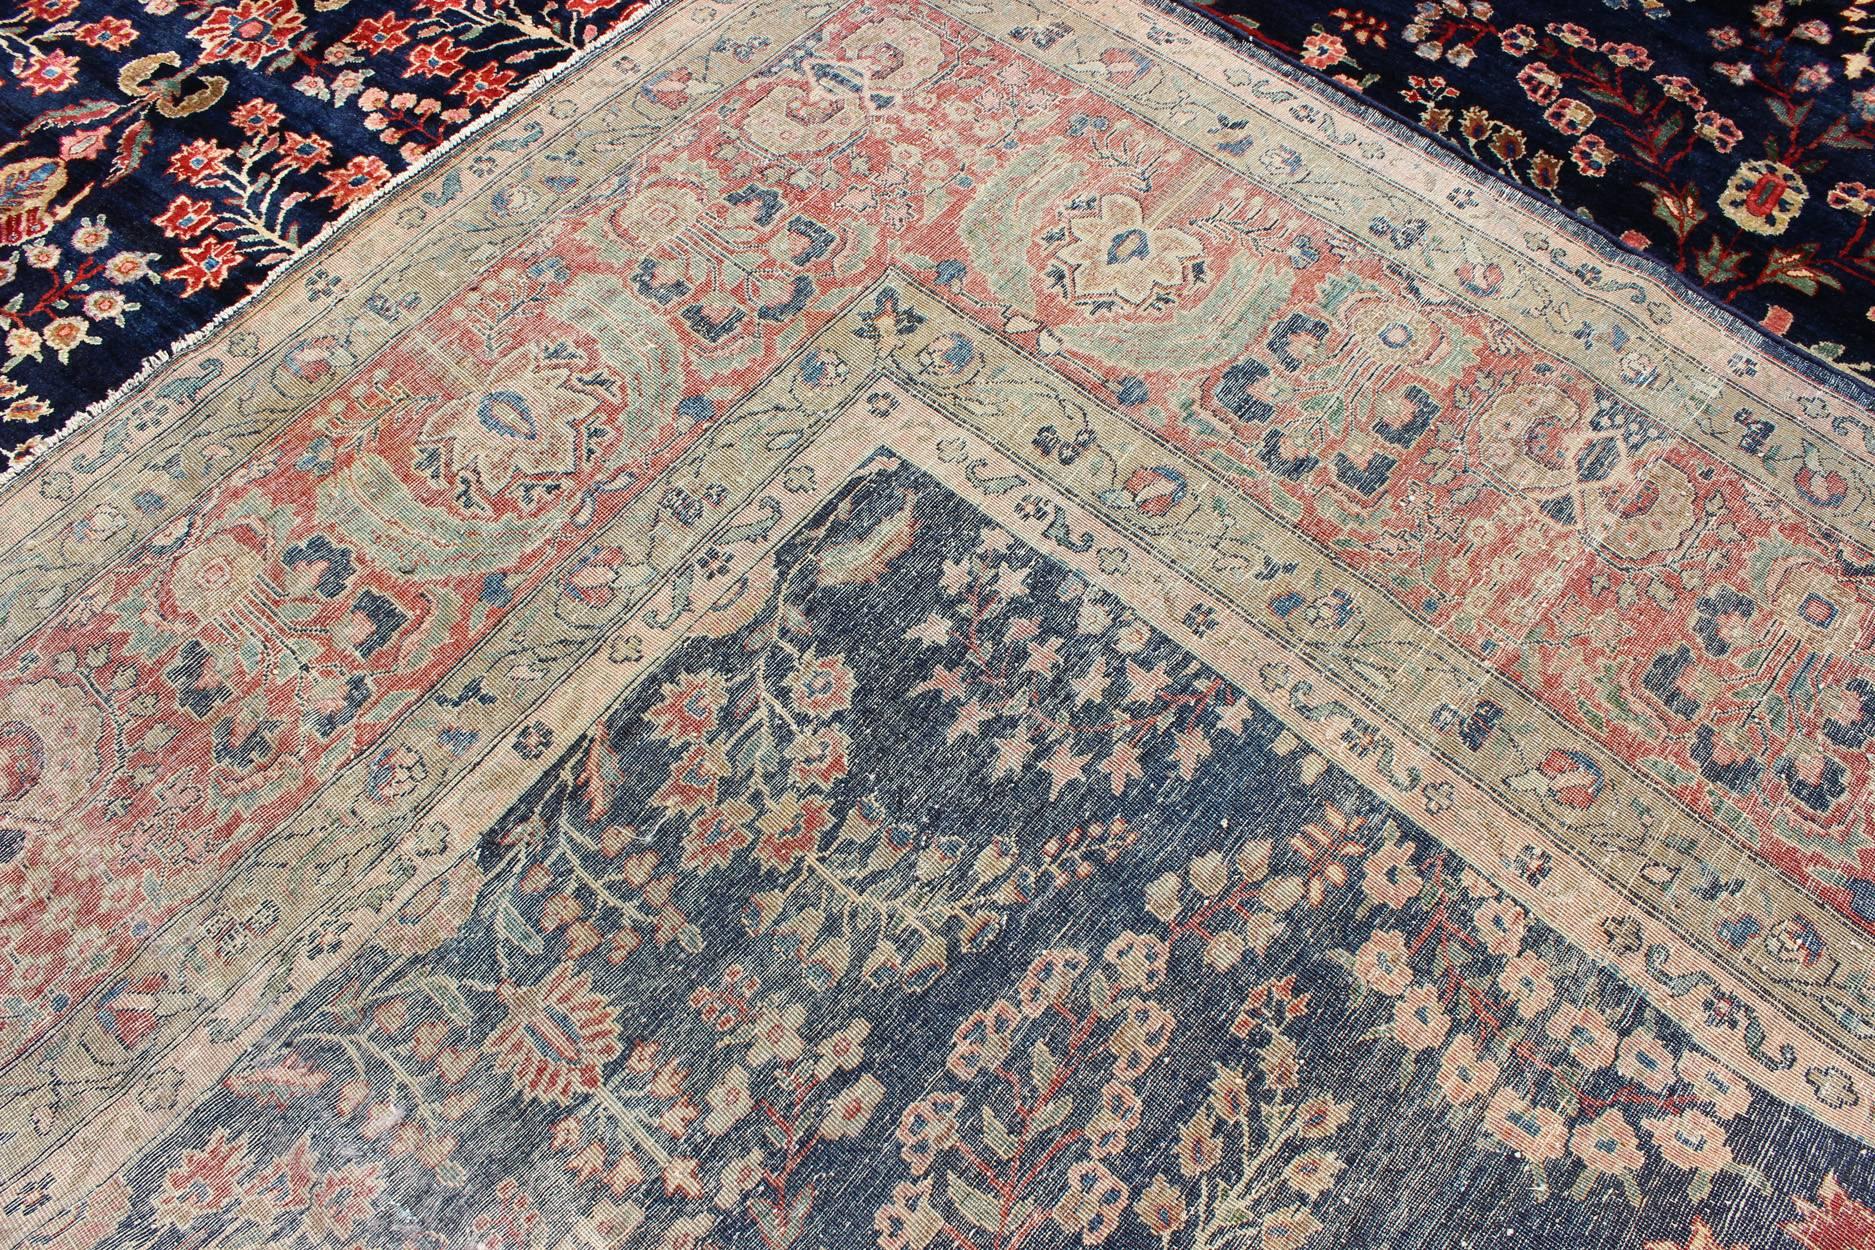 Antique Persian Finely Woven Sarouk Ferahan Rug with Intricate Details 5